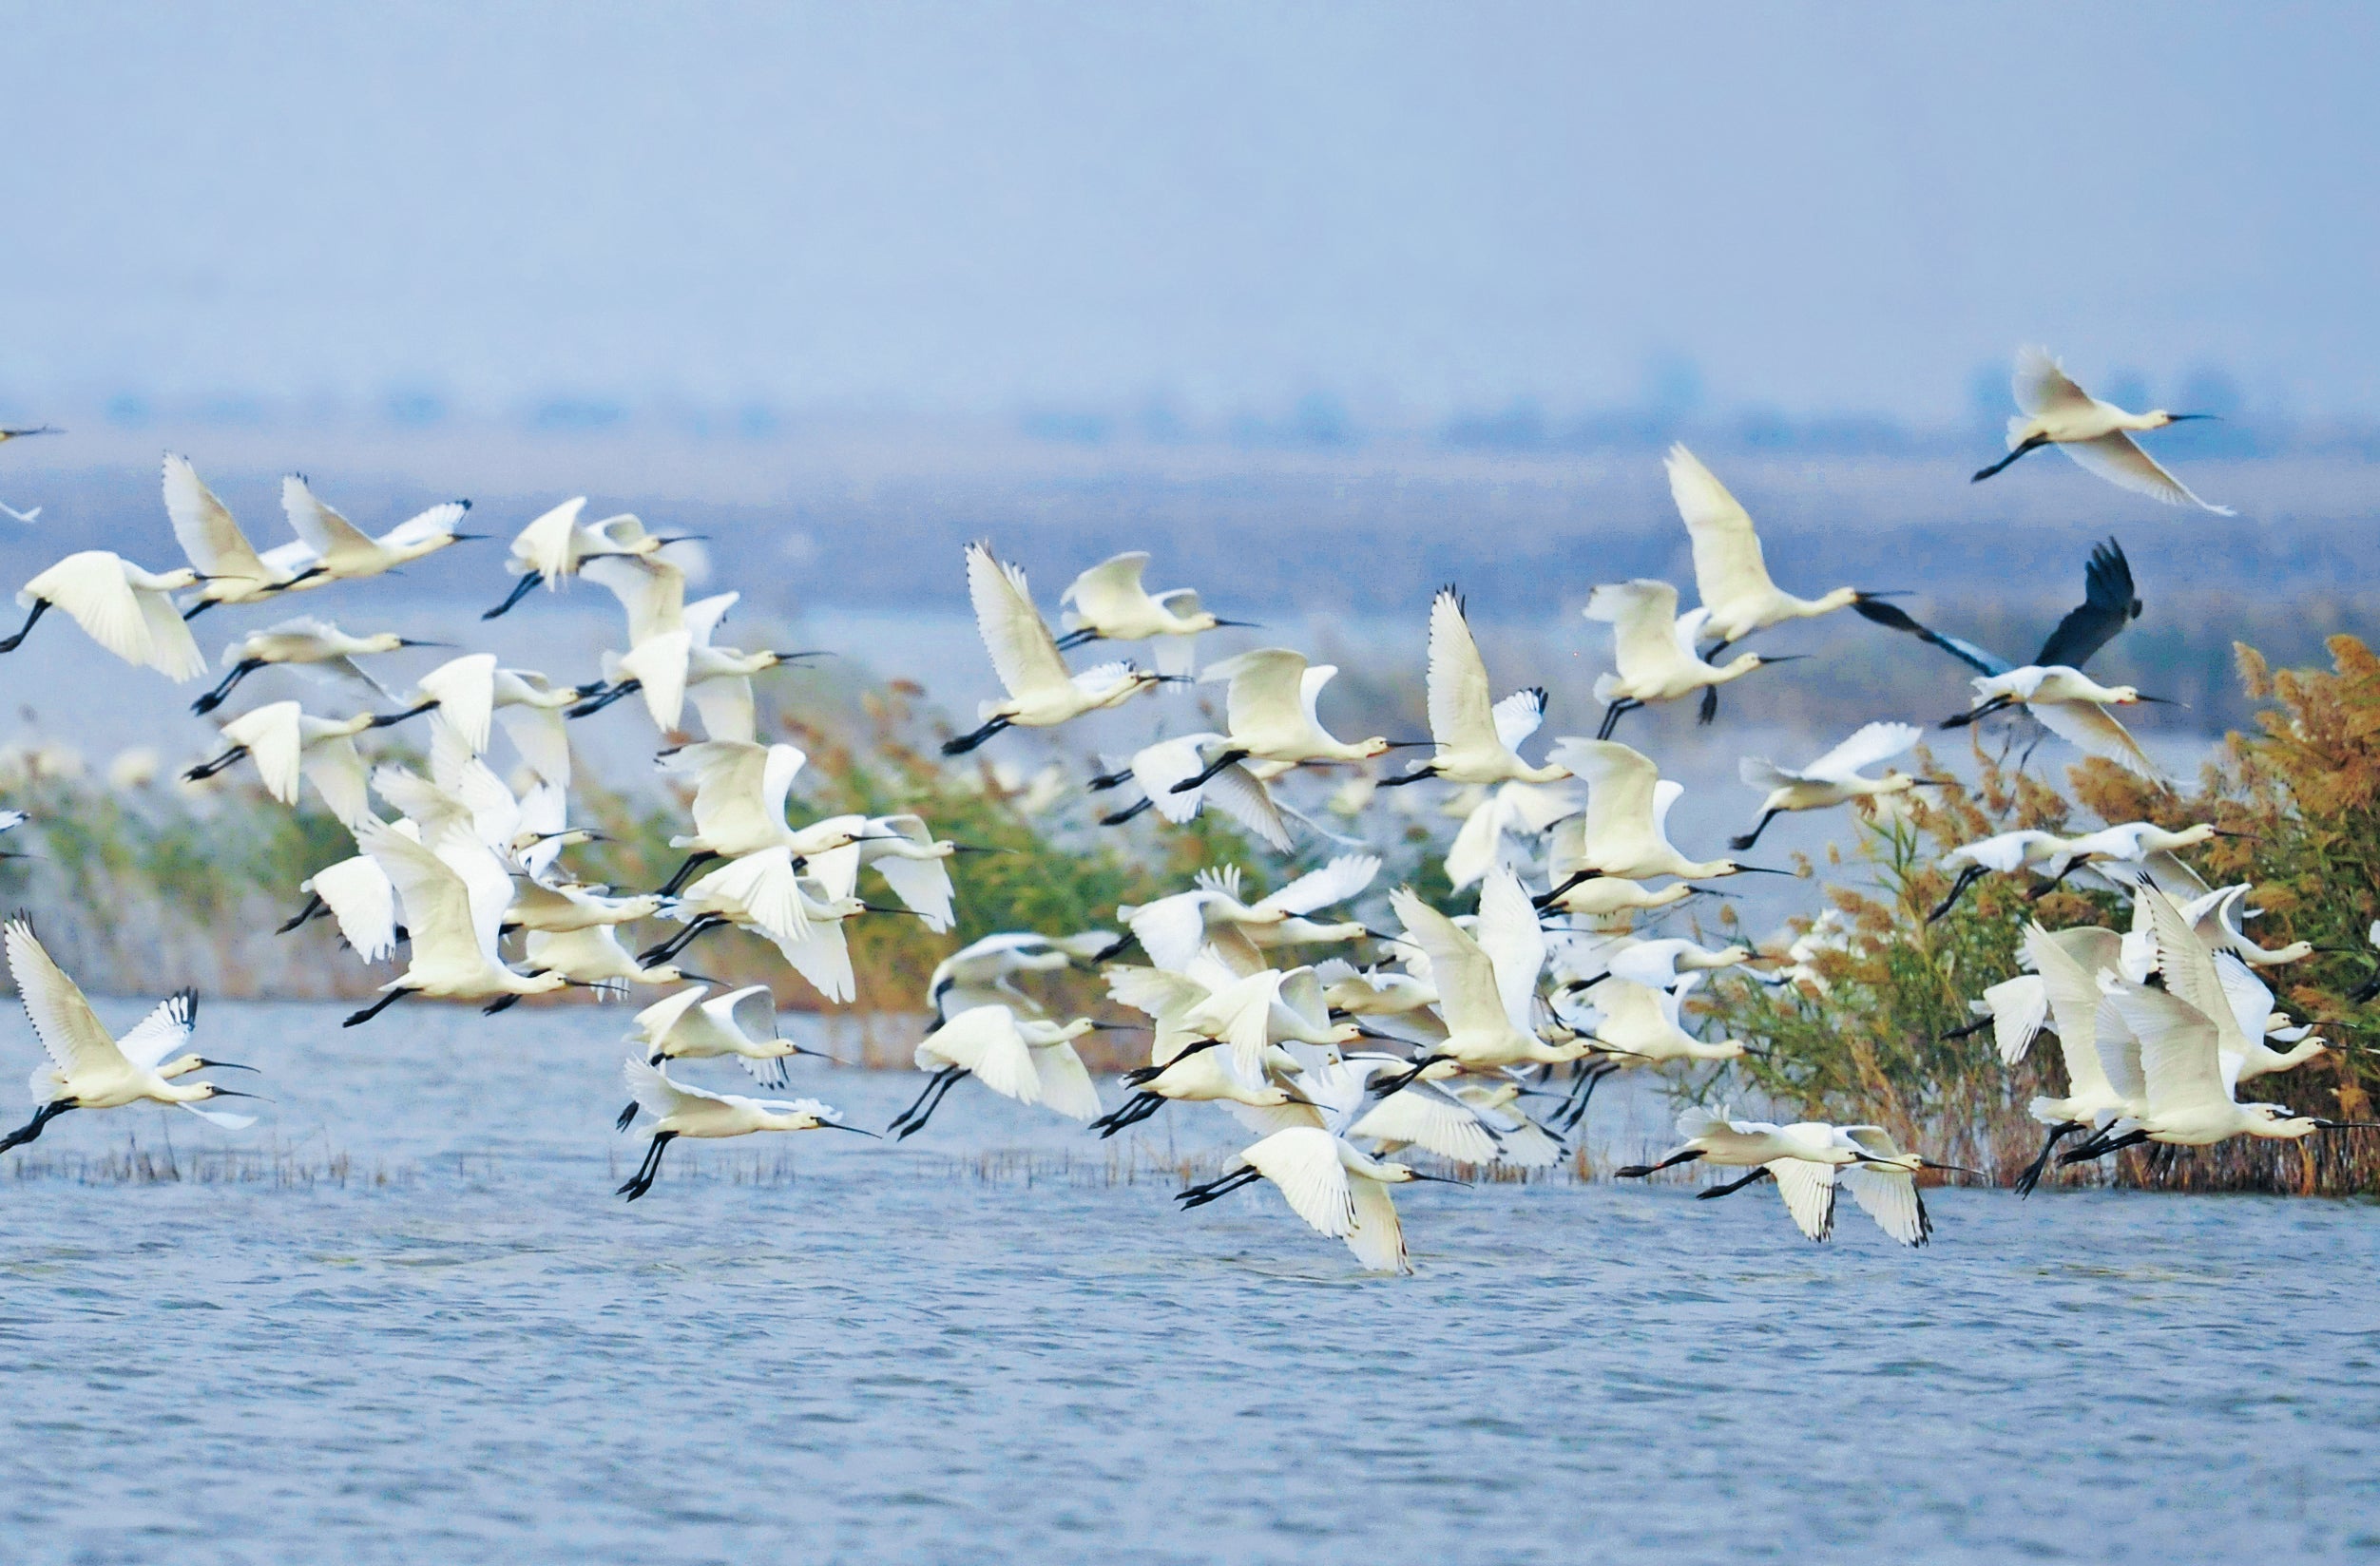 The number of avian species in the Yellow River Delta has risen to 373